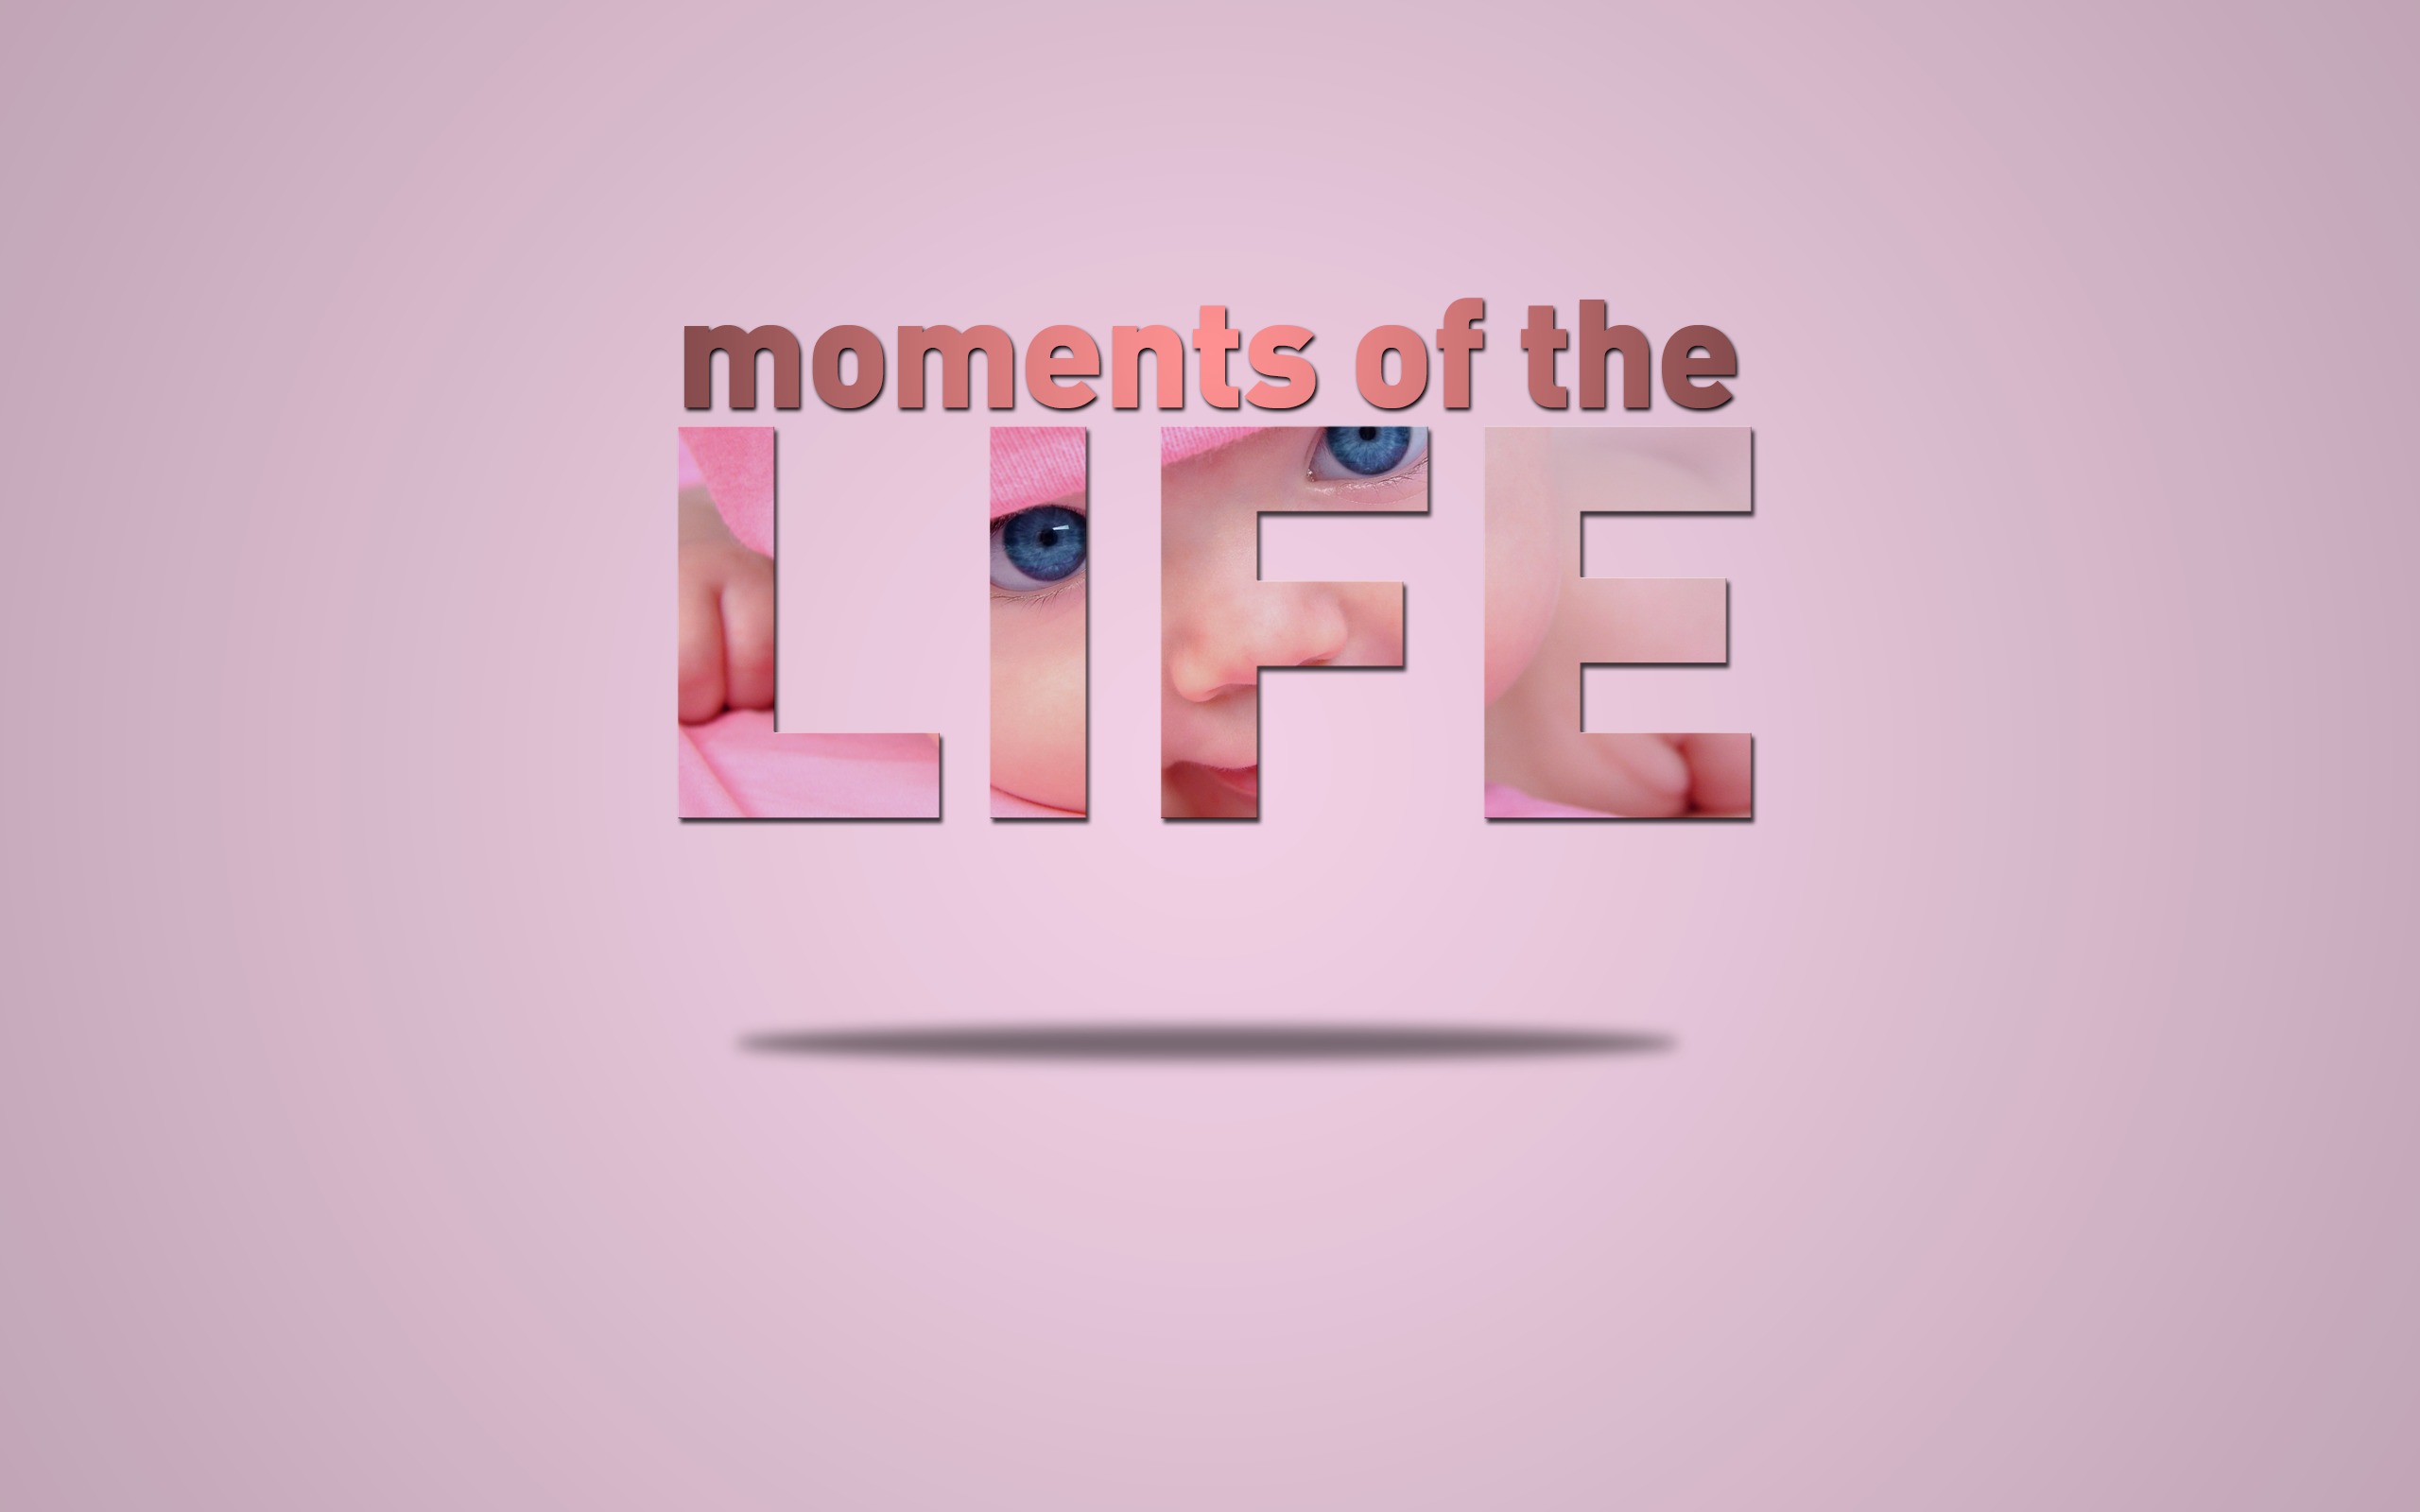 Life is life download